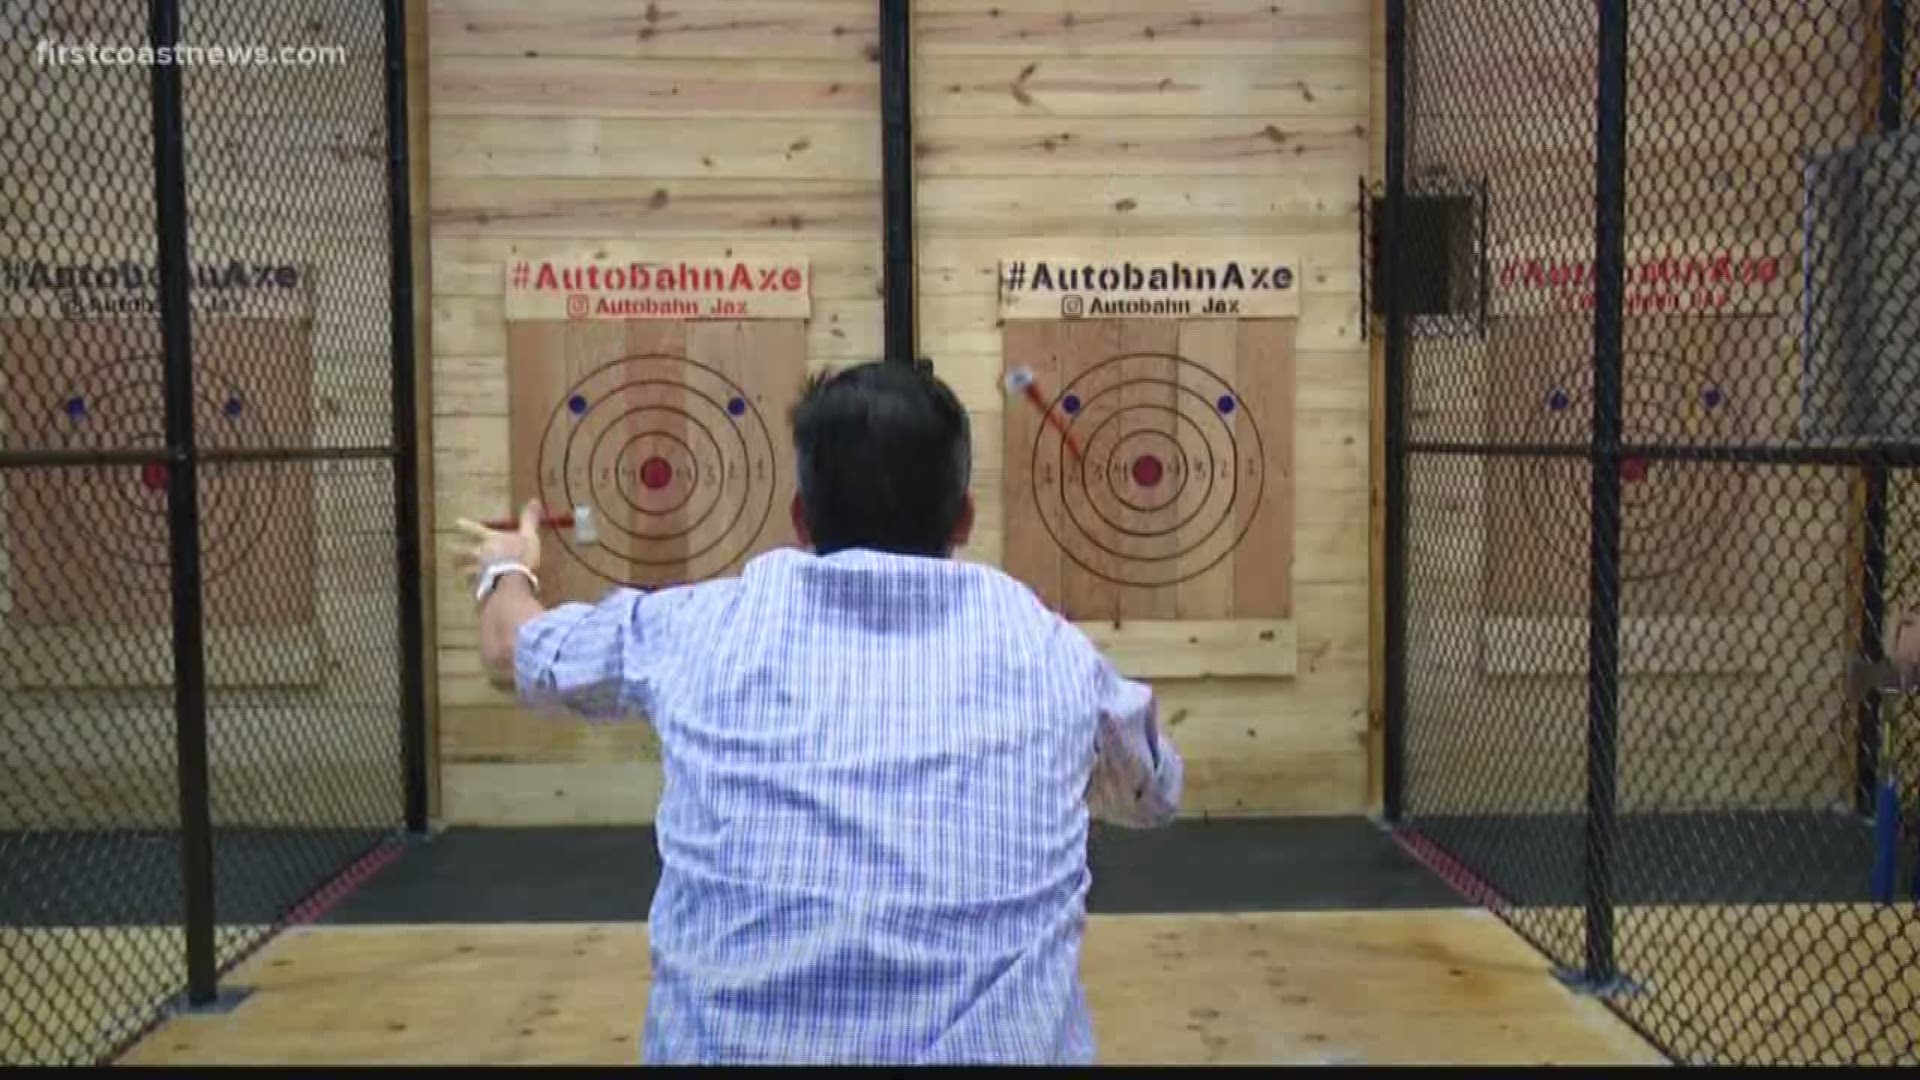 When you need a break from racing, why not throw some axes? You can starting Friday!